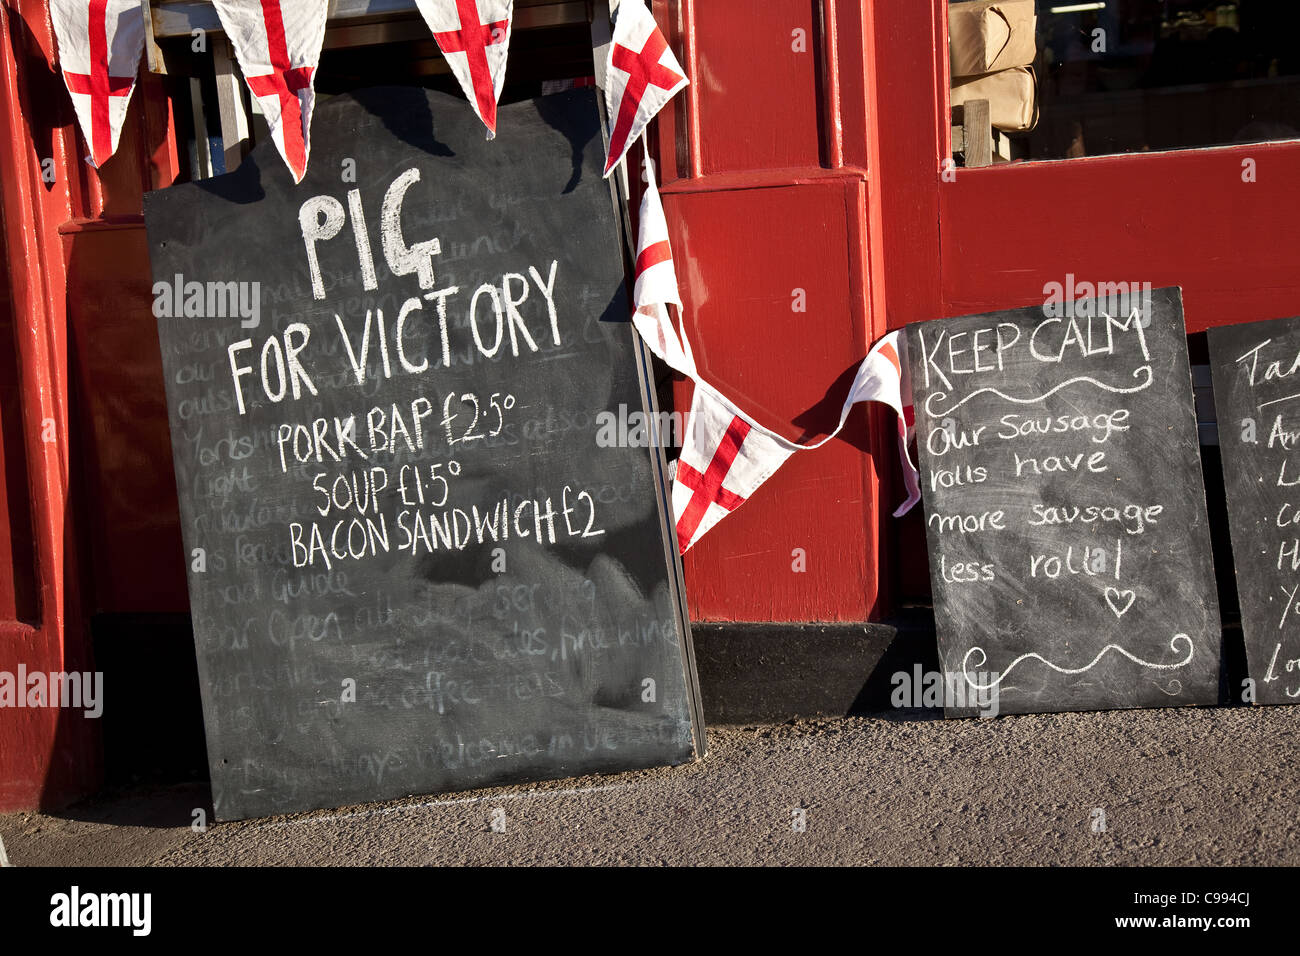 'Pig for Victory' Menu Board outside Cafe selling pig and meat products, Pickering, England, UK Stock Photo